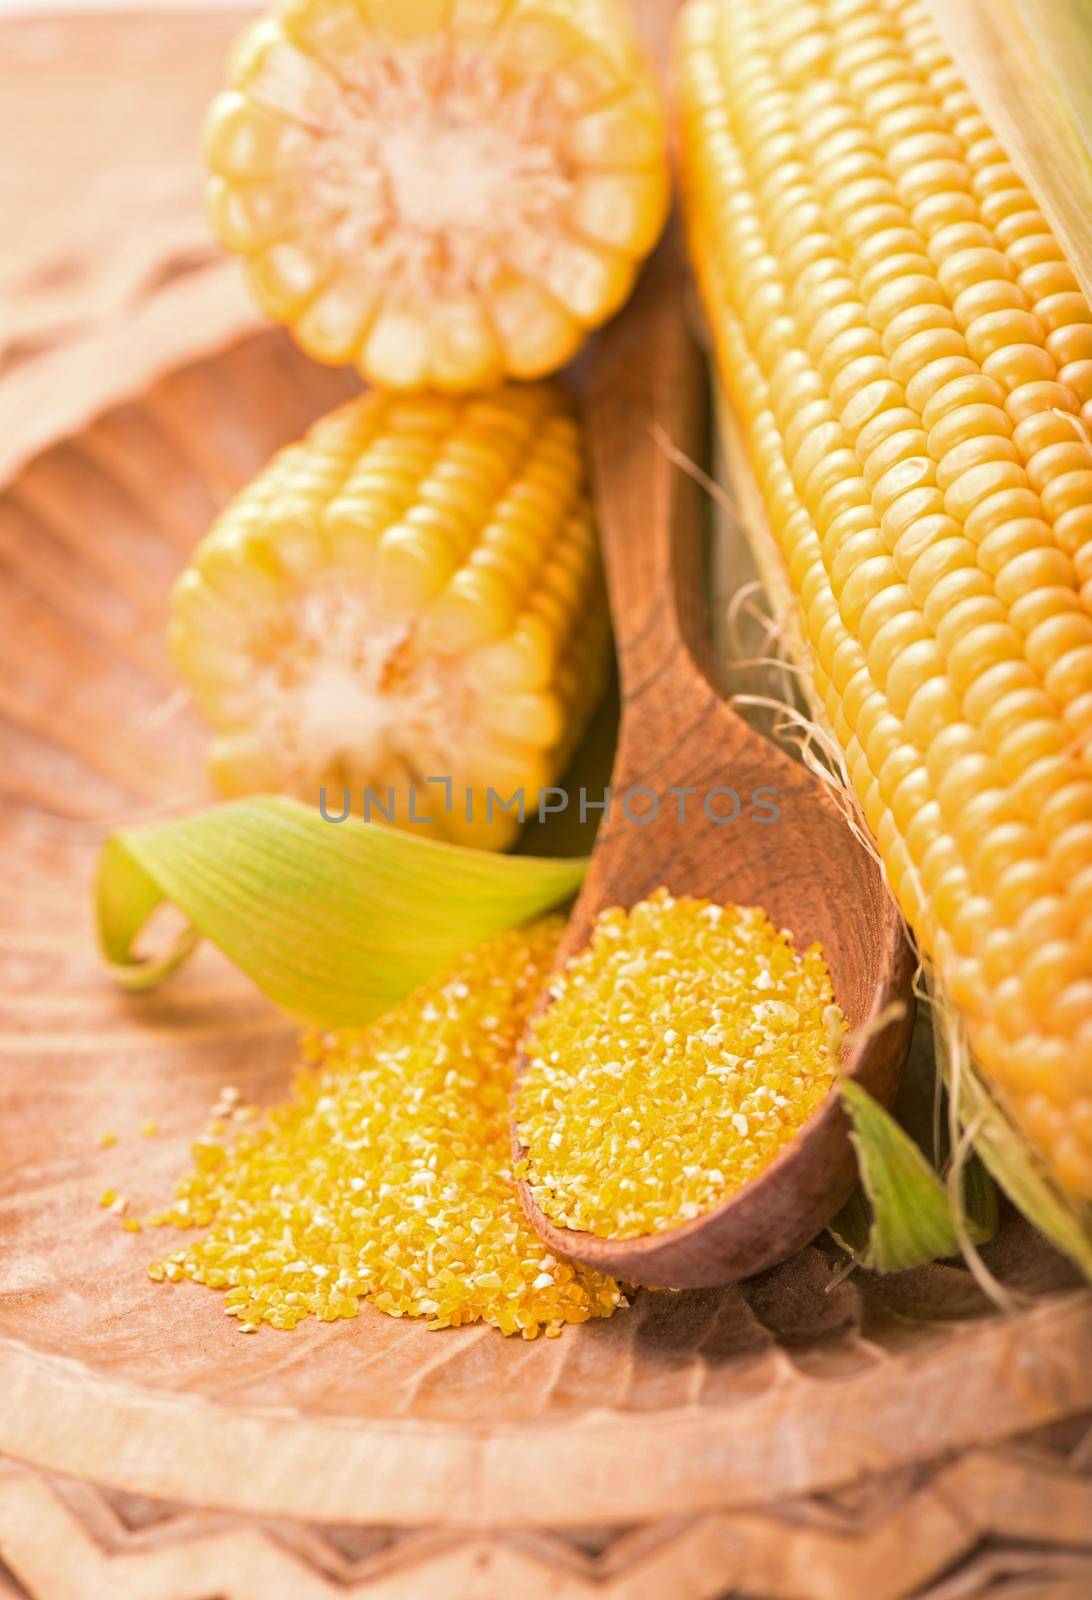 raw corn with green leaves on a white background